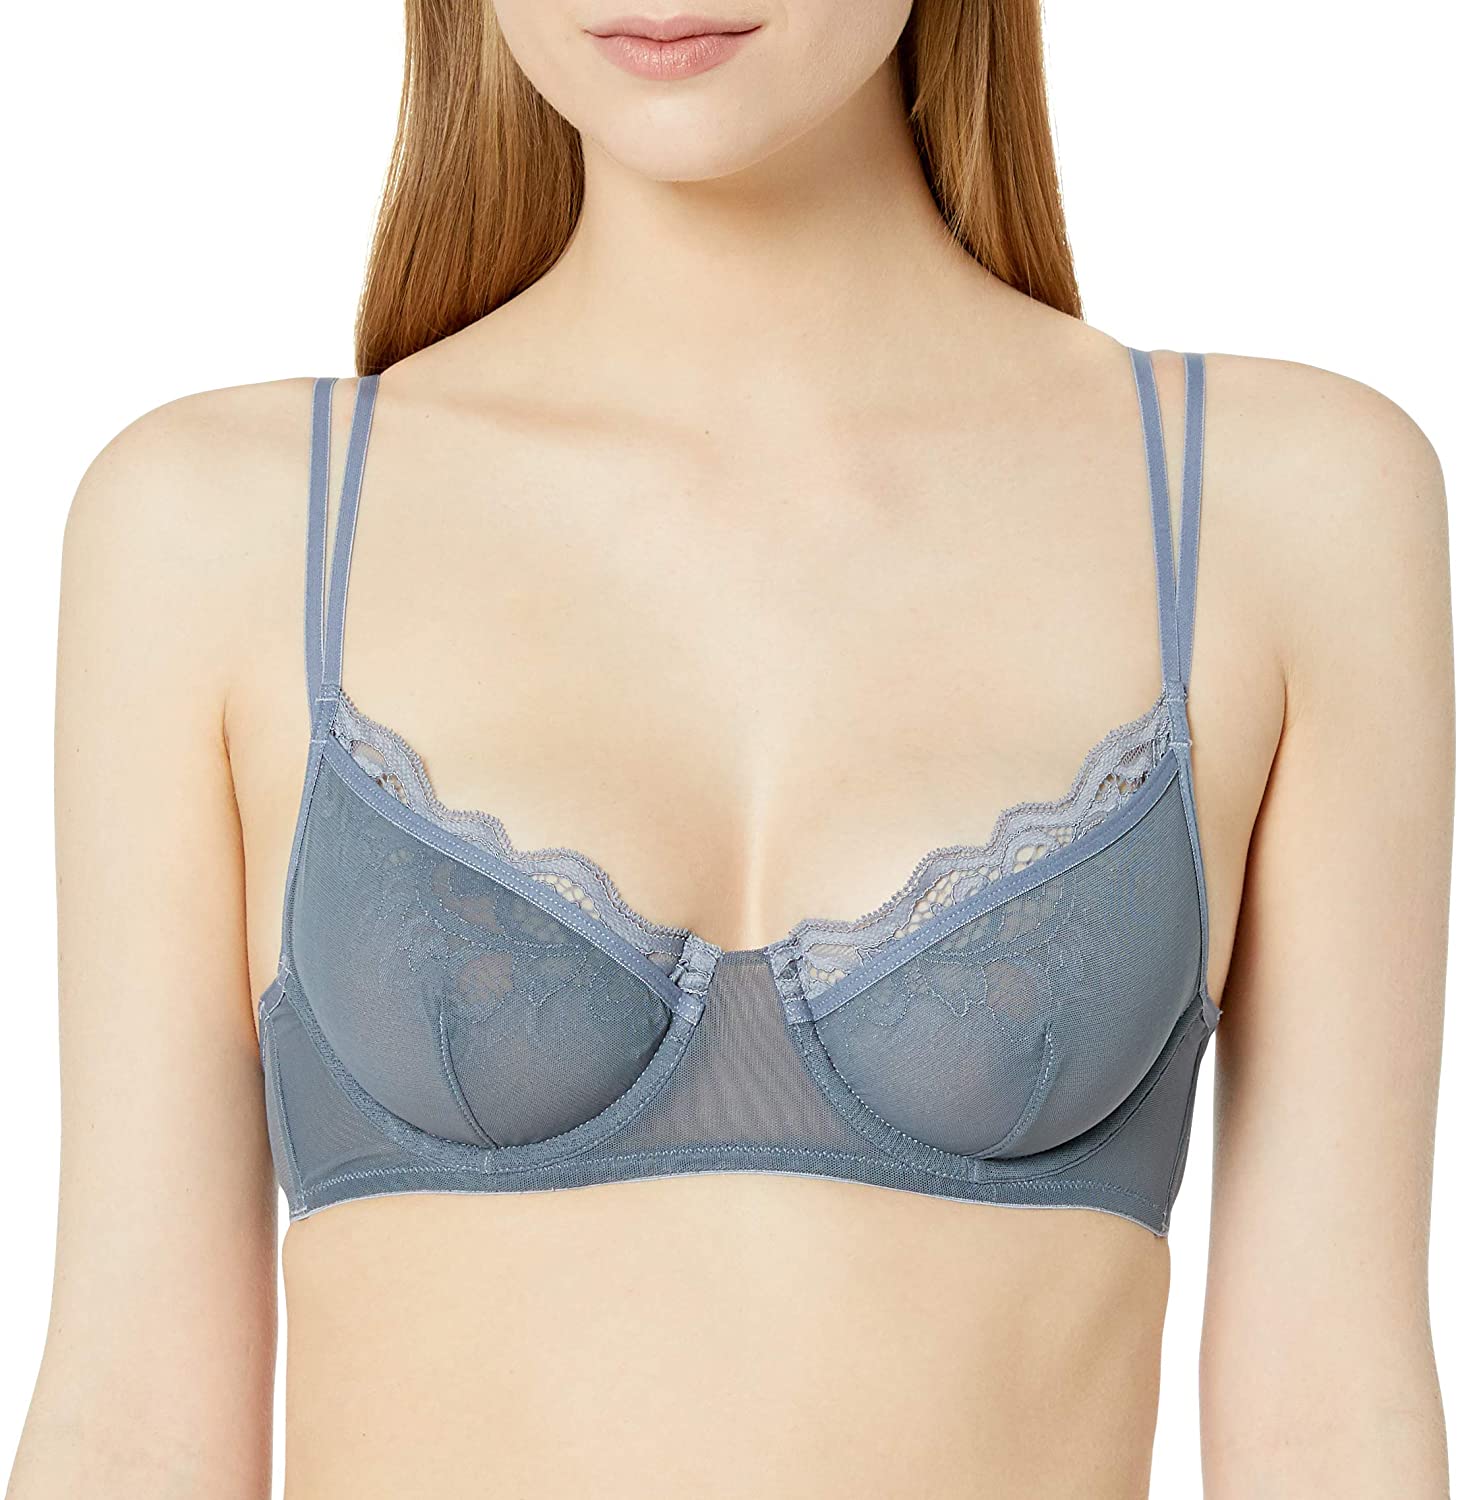 Price:$9.99 Lily of France Sensational Layers Unlined Bralette 2175020 Bra at Amazon Women’s Clothing store